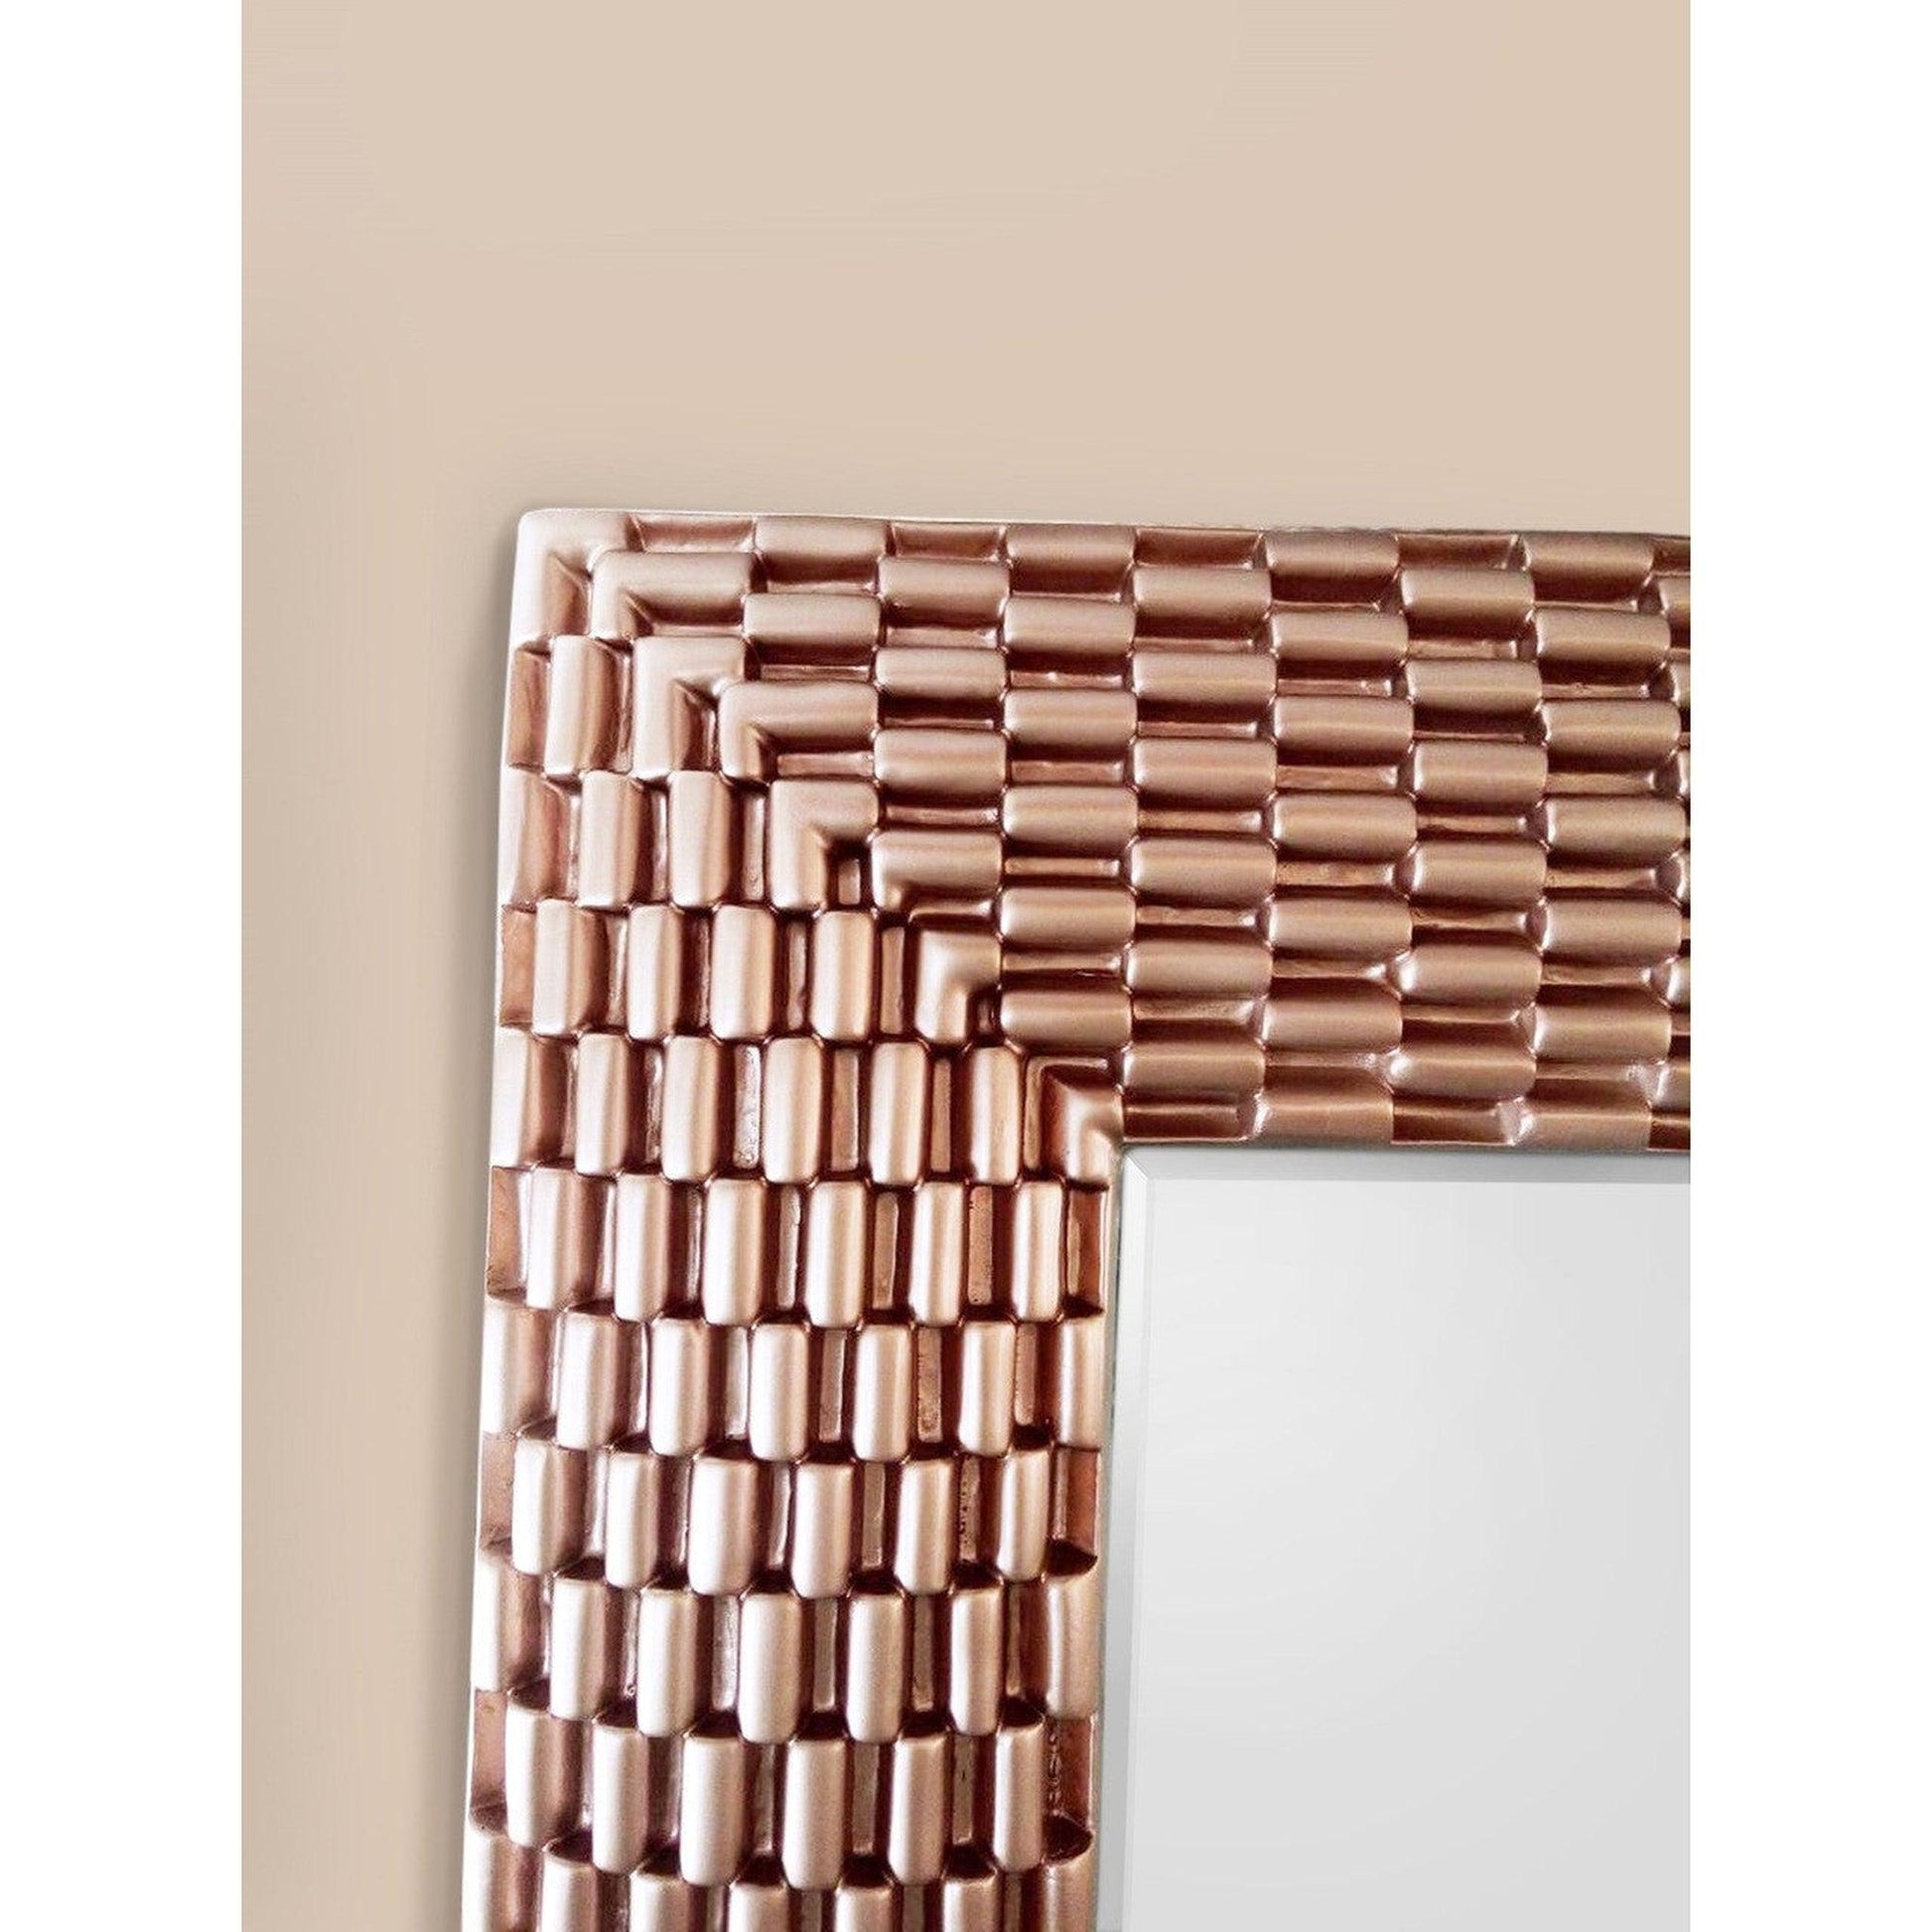 SBC Decor Rose 49" x 37" Wall-Mounted Basket Weave Texture Wood Frame Dresser Large Wall Mirror In Rose Gold Finish